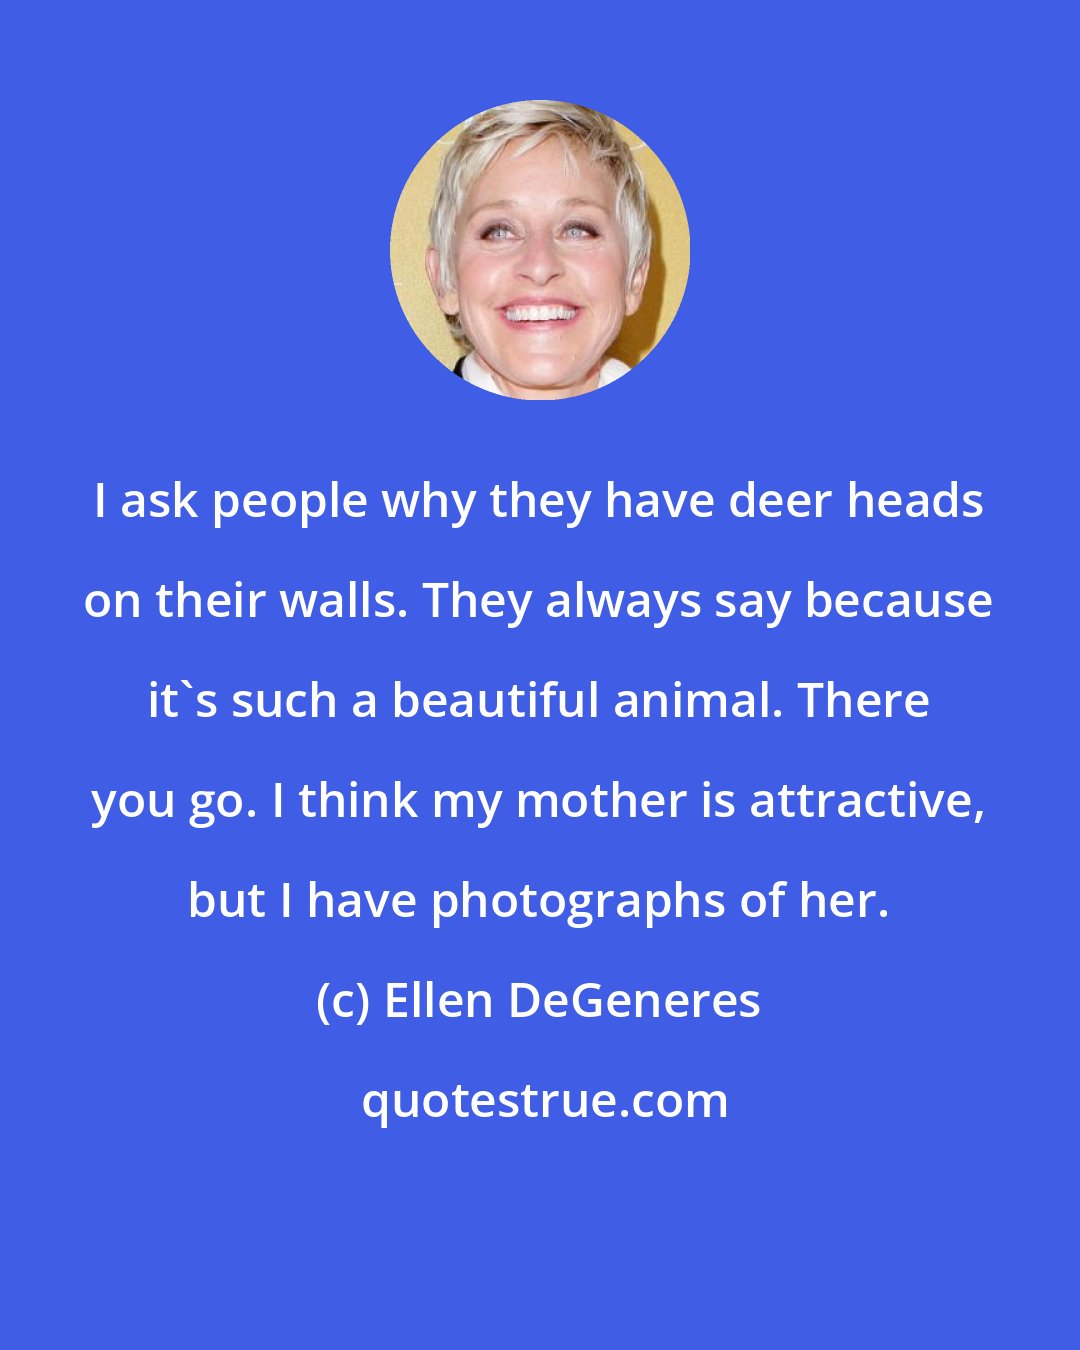 Ellen DeGeneres: I ask people why they have deer heads on their walls. They always say because it's such a beautiful animal. There you go. I think my mother is attractive, but I have photographs of her.